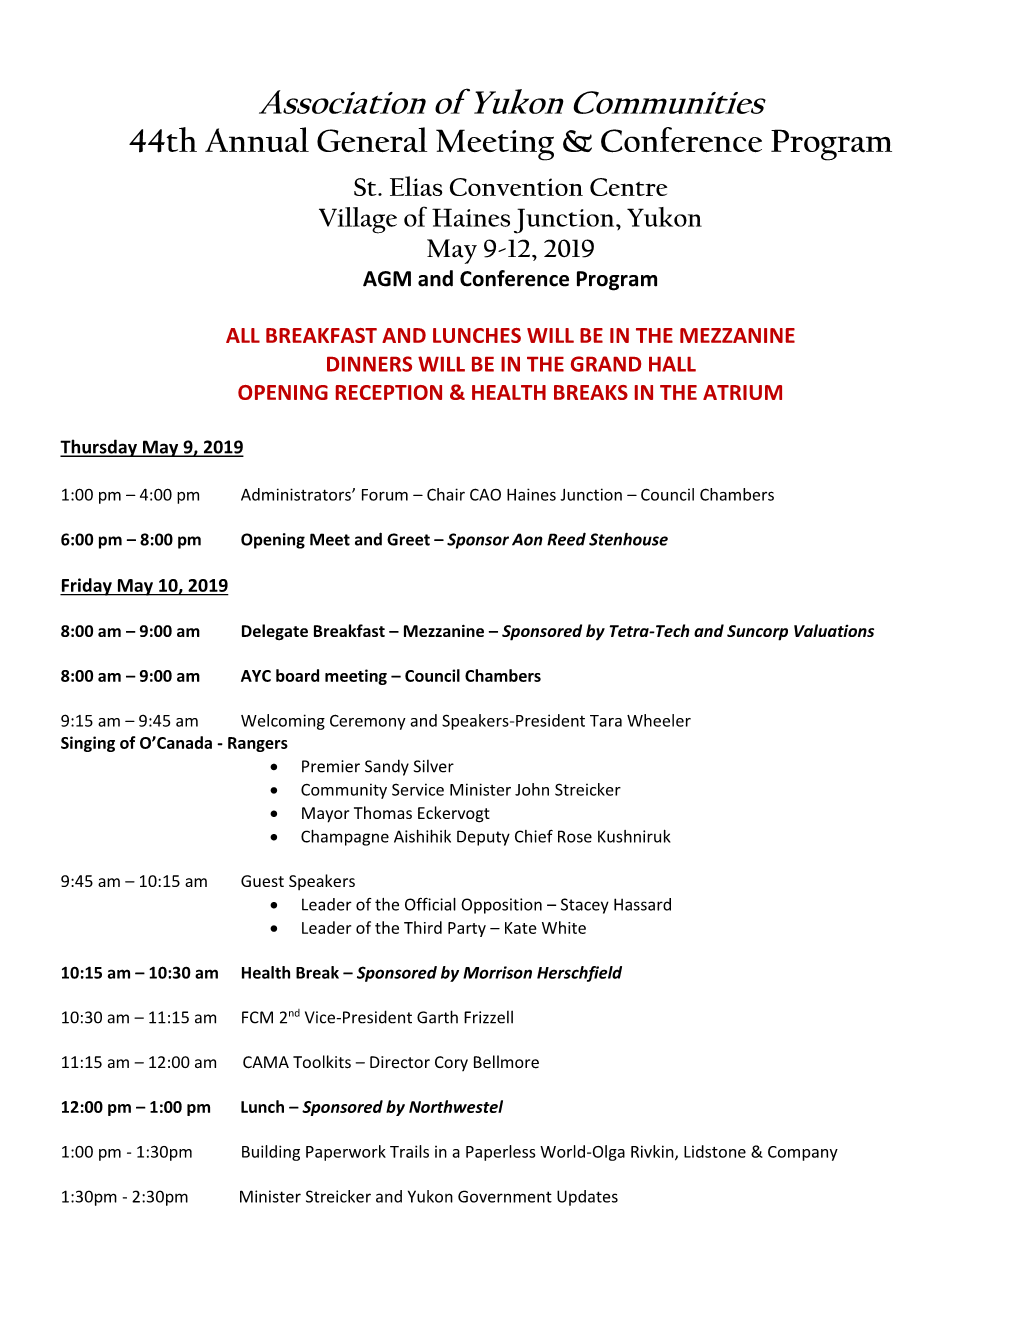 Association of Yukon Communities 44Th Annual General Meeting & Conference Program